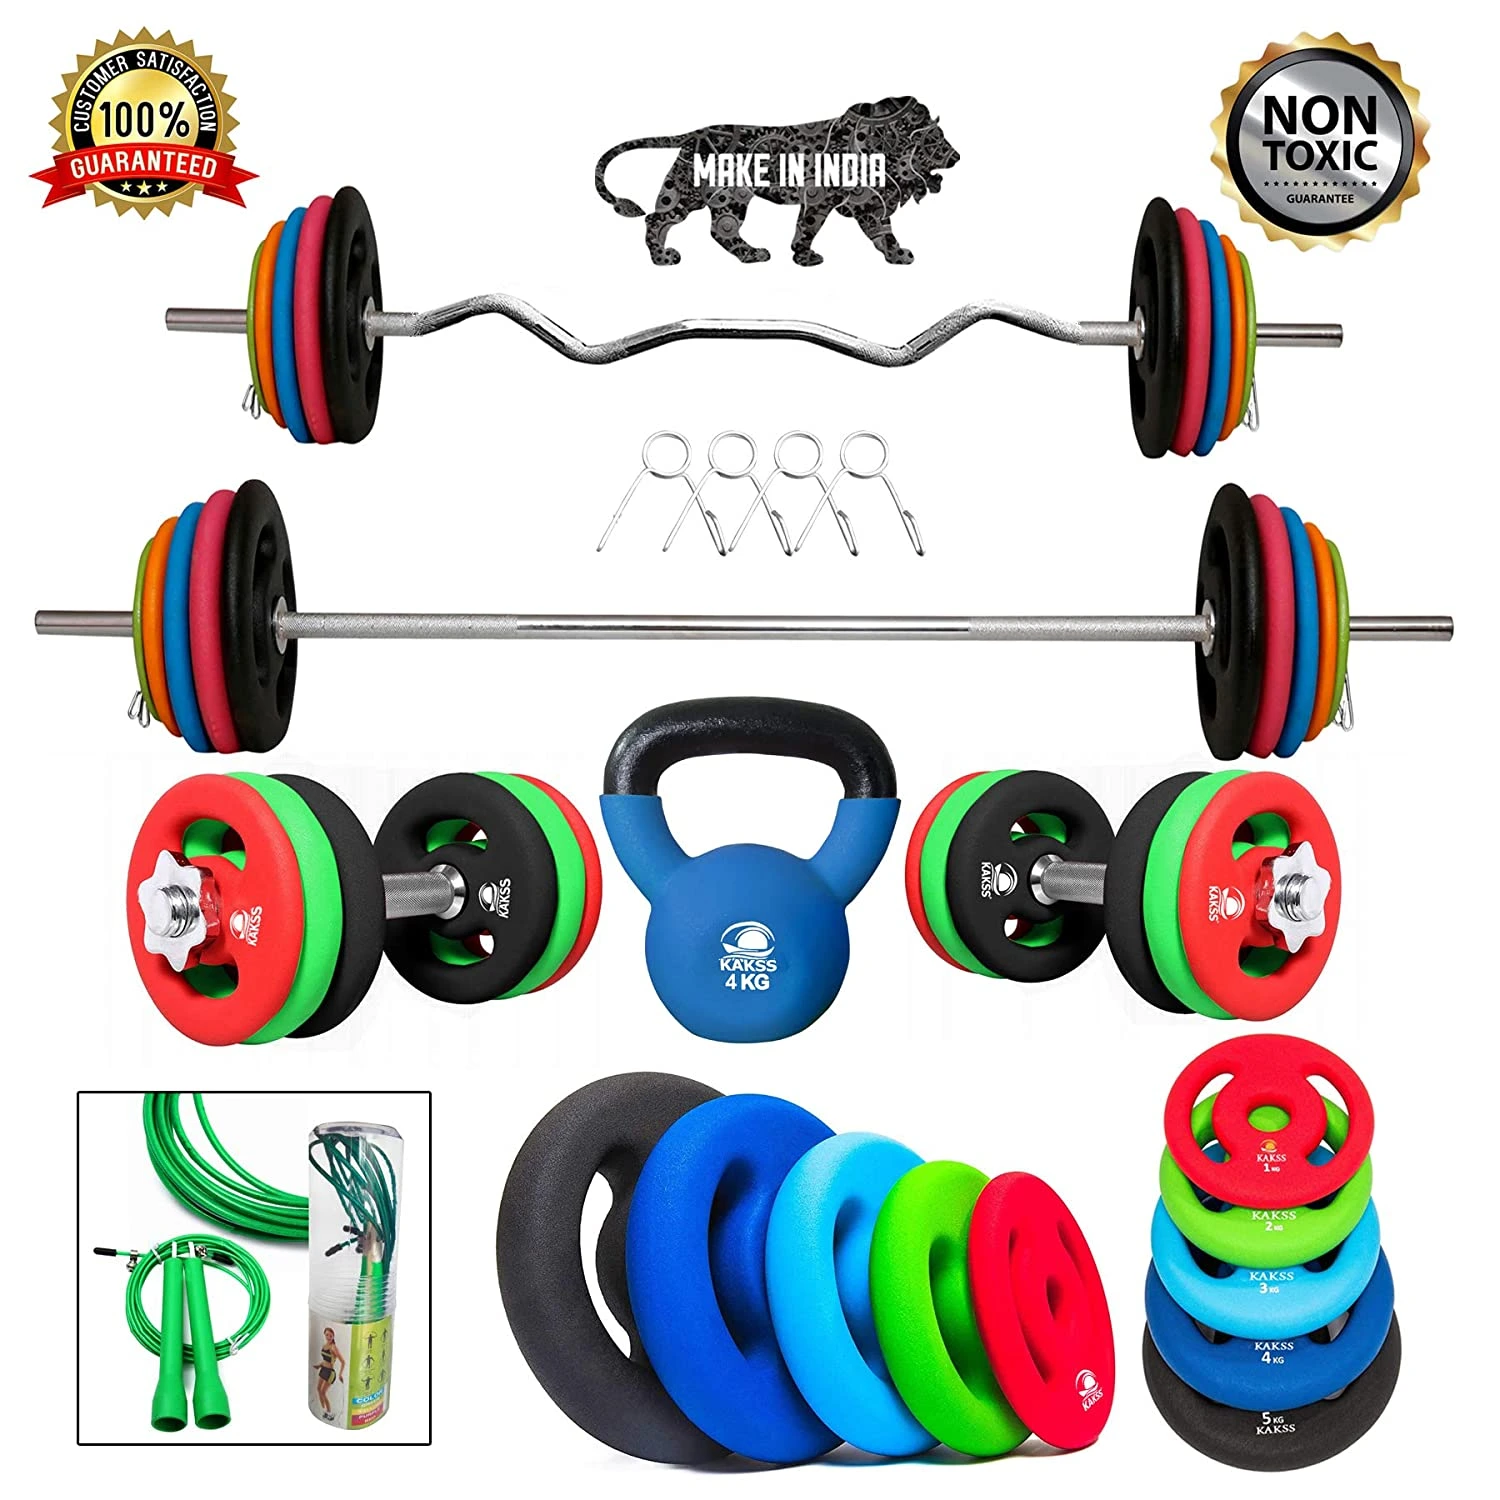 Best home gym kit in India